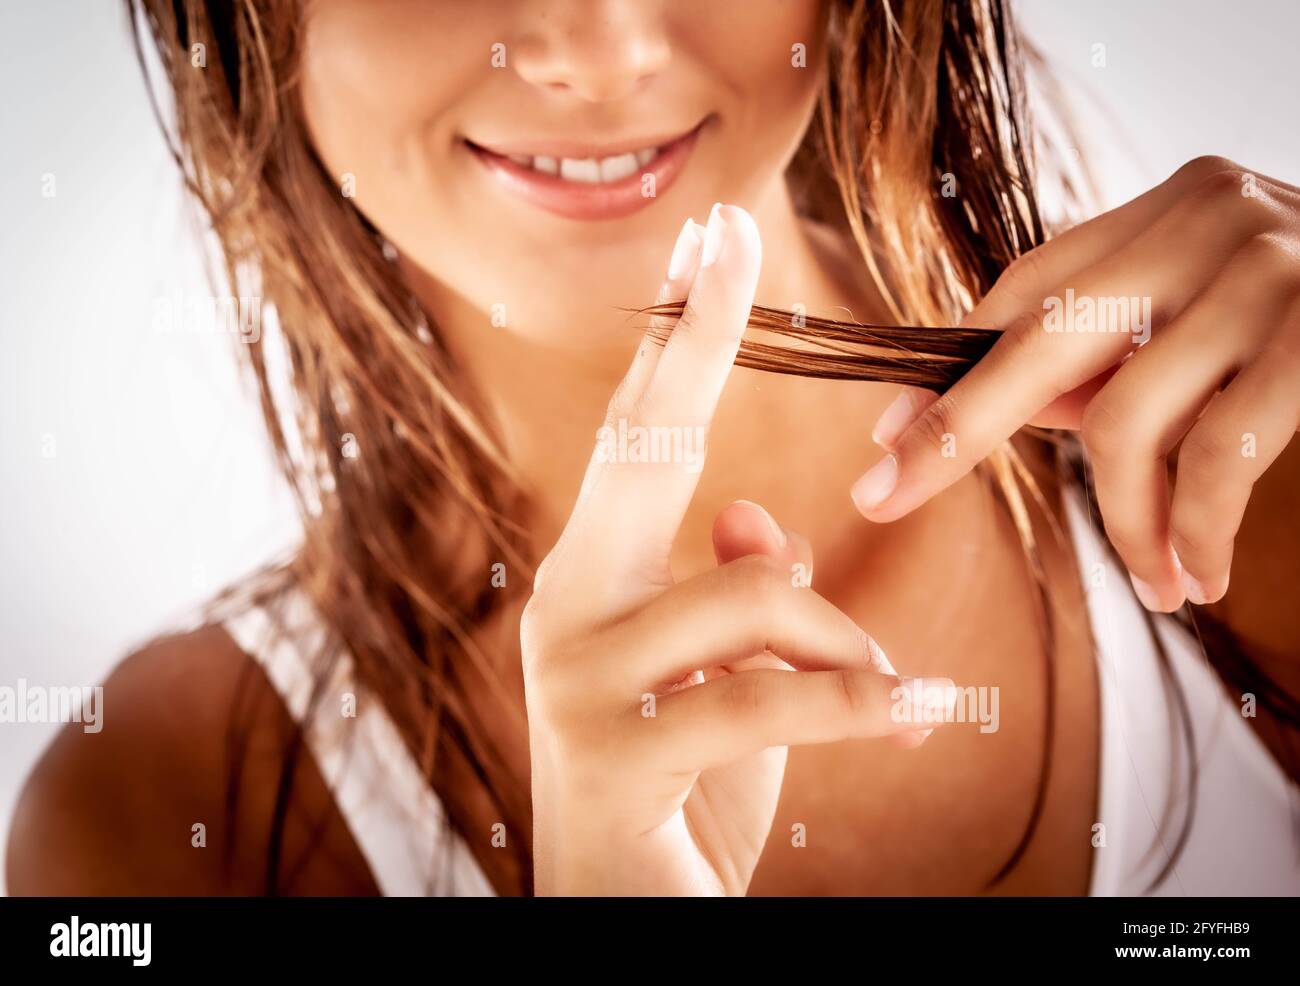 Woman inspecting the tip of her hair. Stock Photo